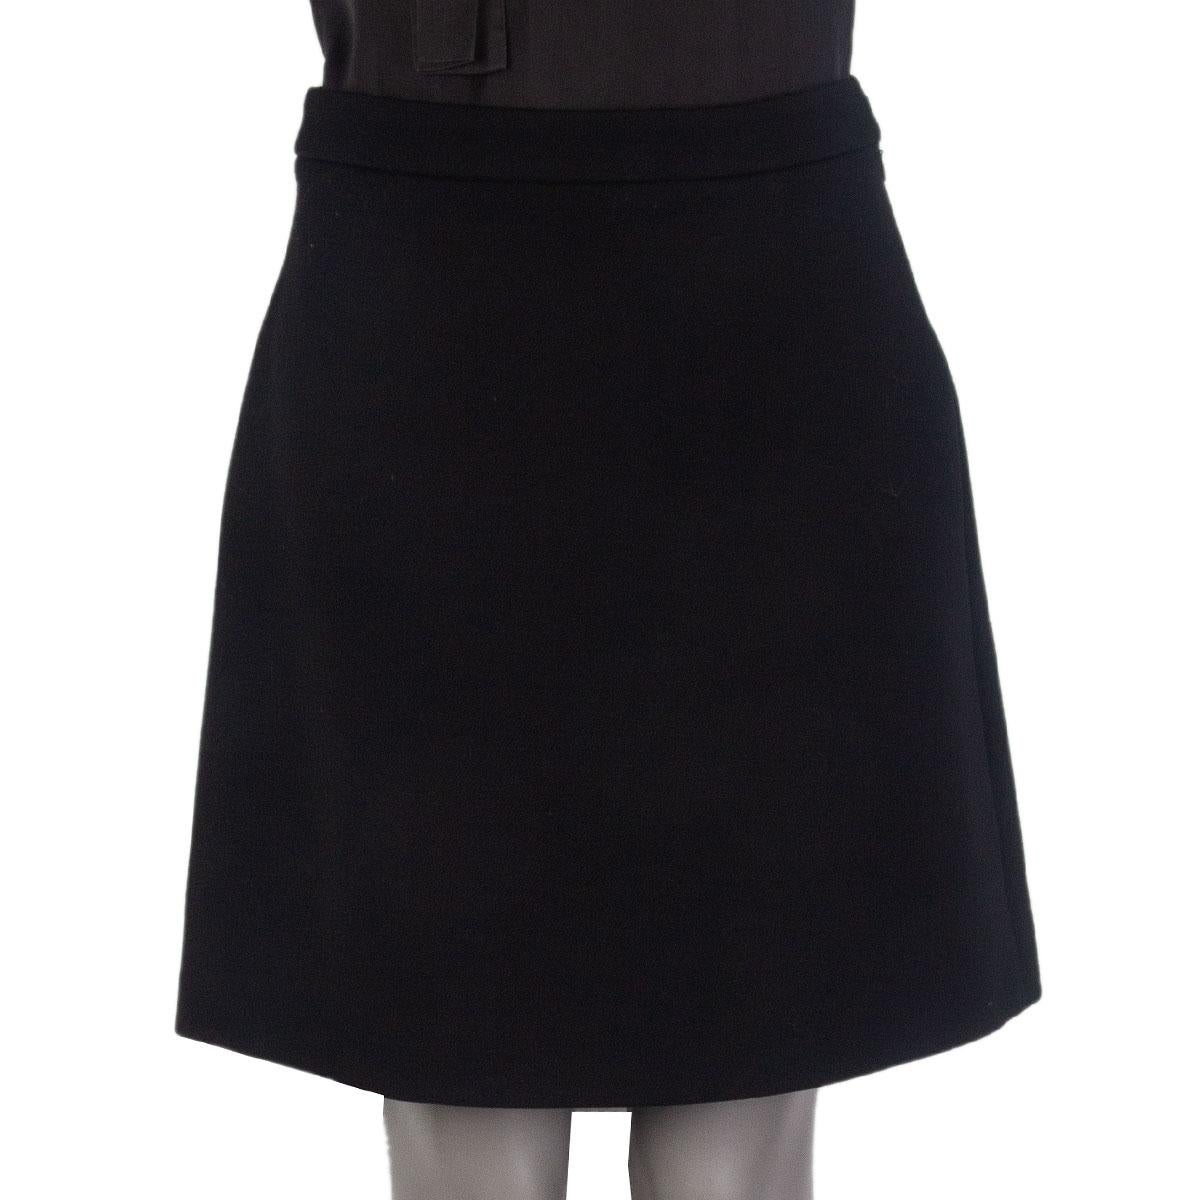 100% authentic Miu Miu A Line skirt in black virgin wool (100%). Closes with a hook and a concealed zipper on the side. Lined in black polyester (100%). Has been worn and is in excellent condition.

Tag Size 40
Size S
Waist 70cm (27.3in)
Hips 98cm